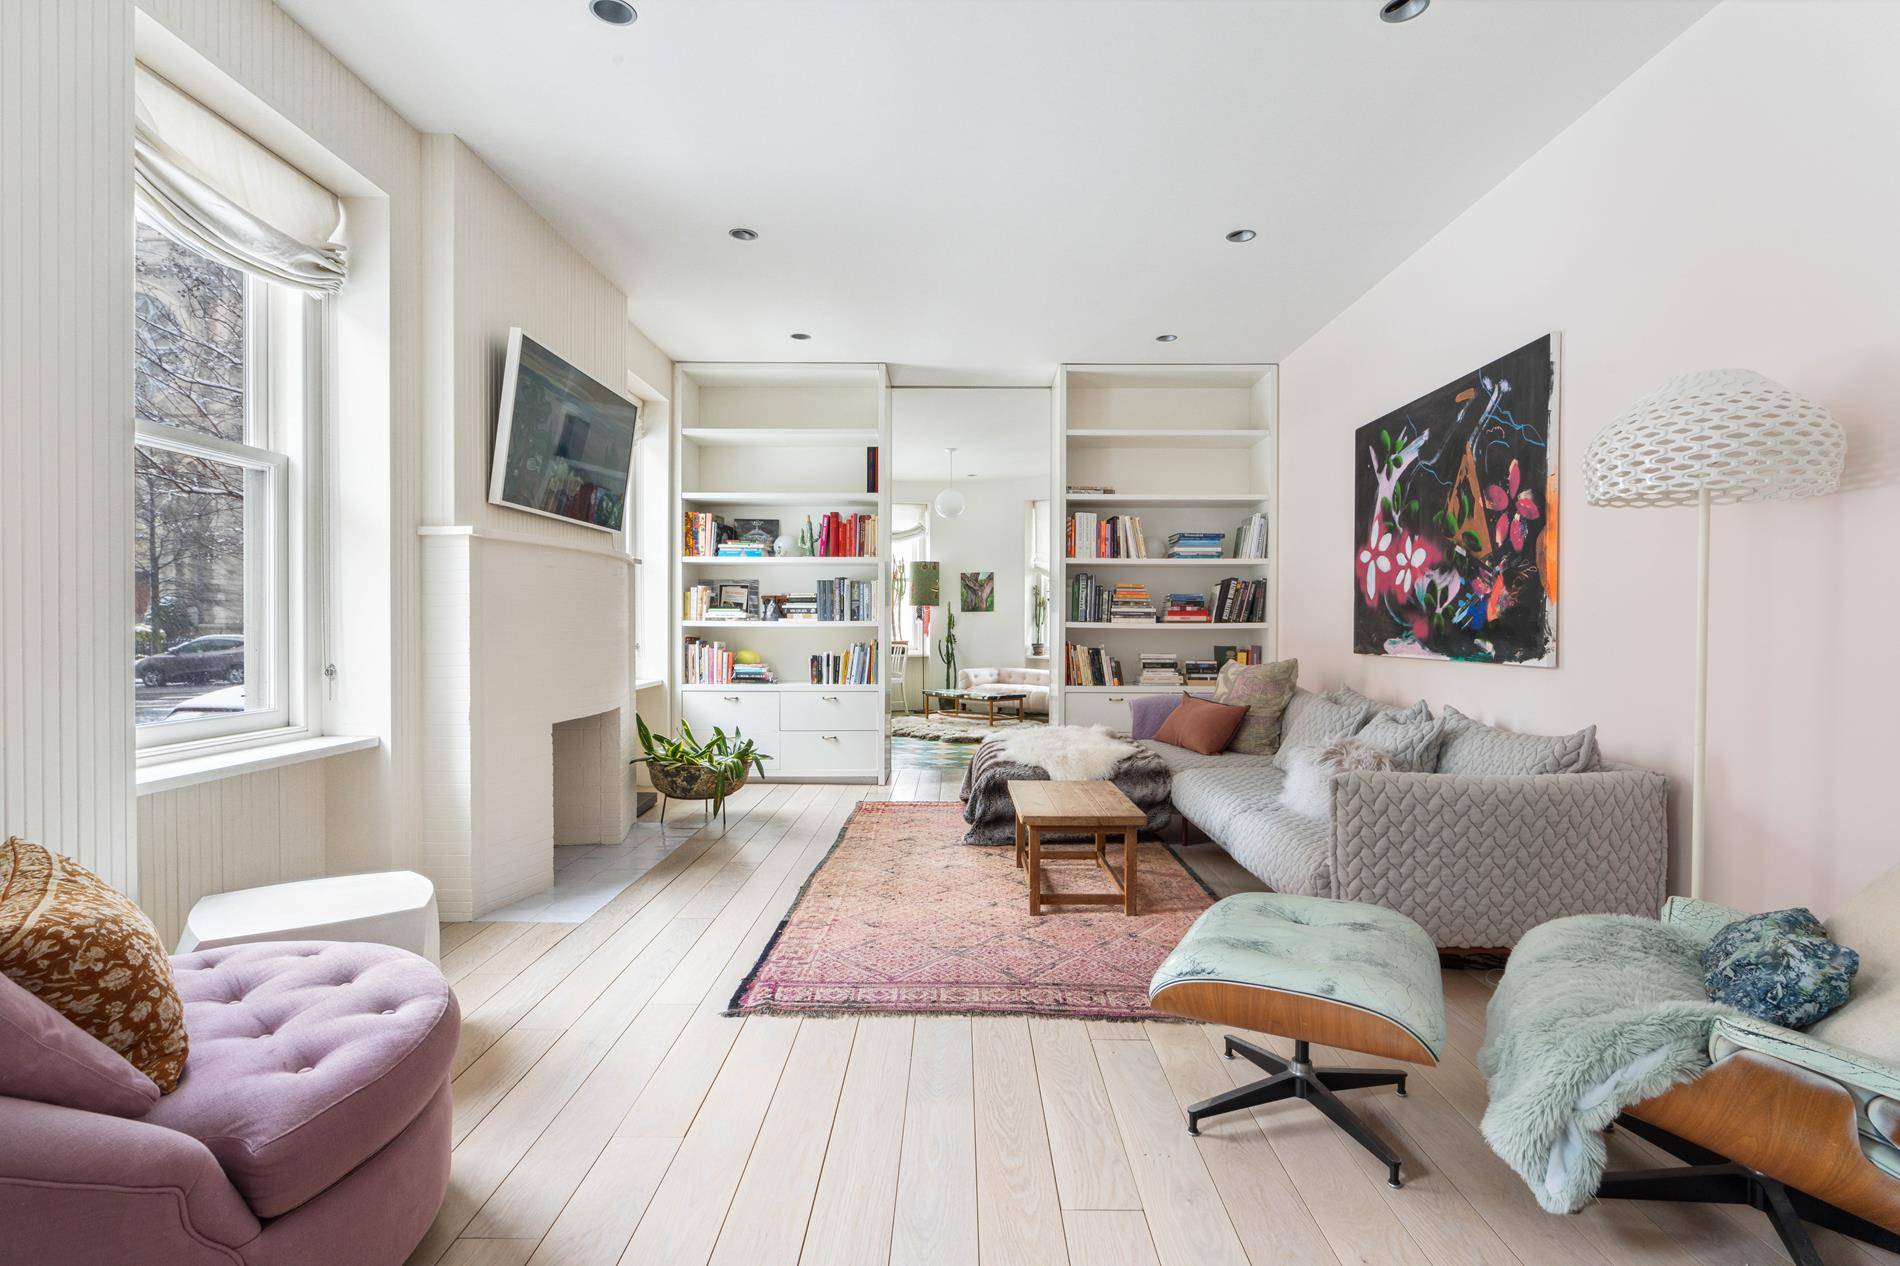 A sweeping Duplex in the heart of Park Slope.